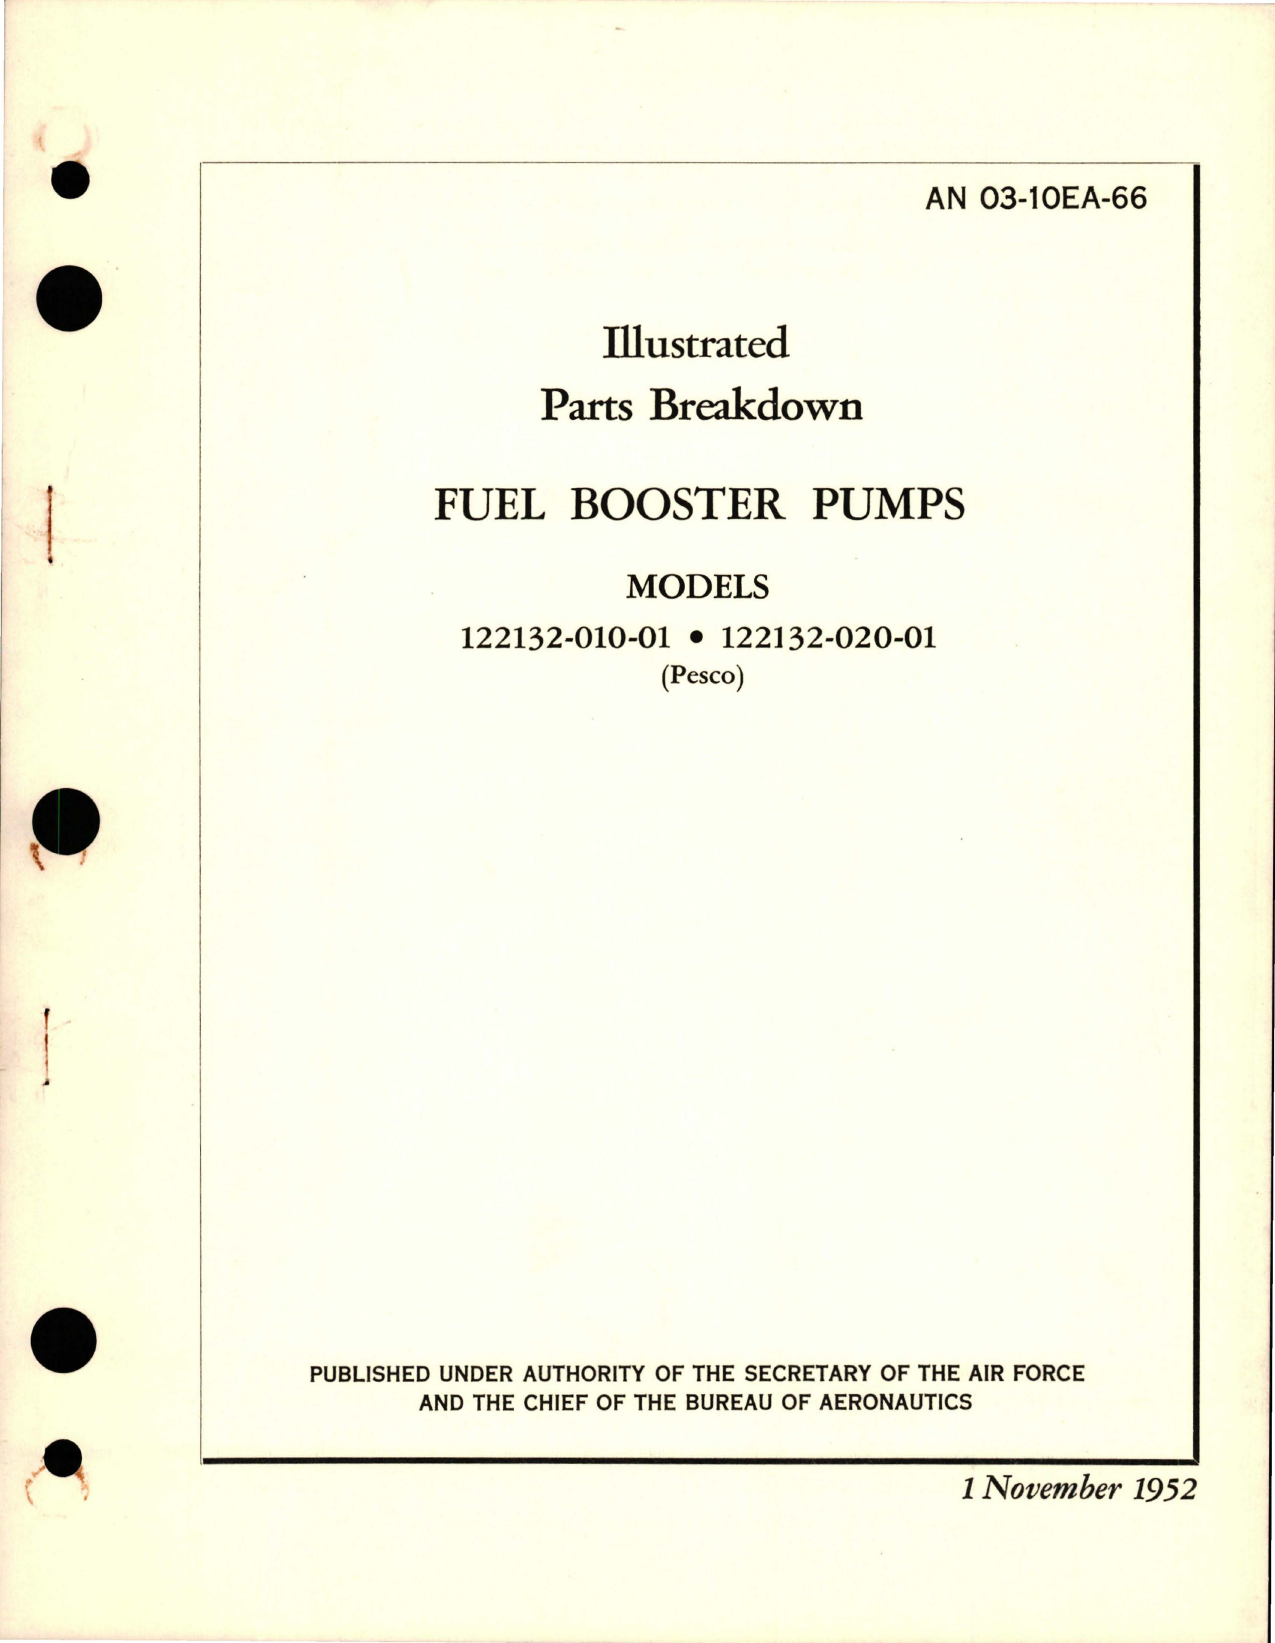 Sample page 1 from AirCorps Library document: Illustrated Parts Breakdown for Fuel Booster Pumps - Models 122132-010-01 and 122132-020-01